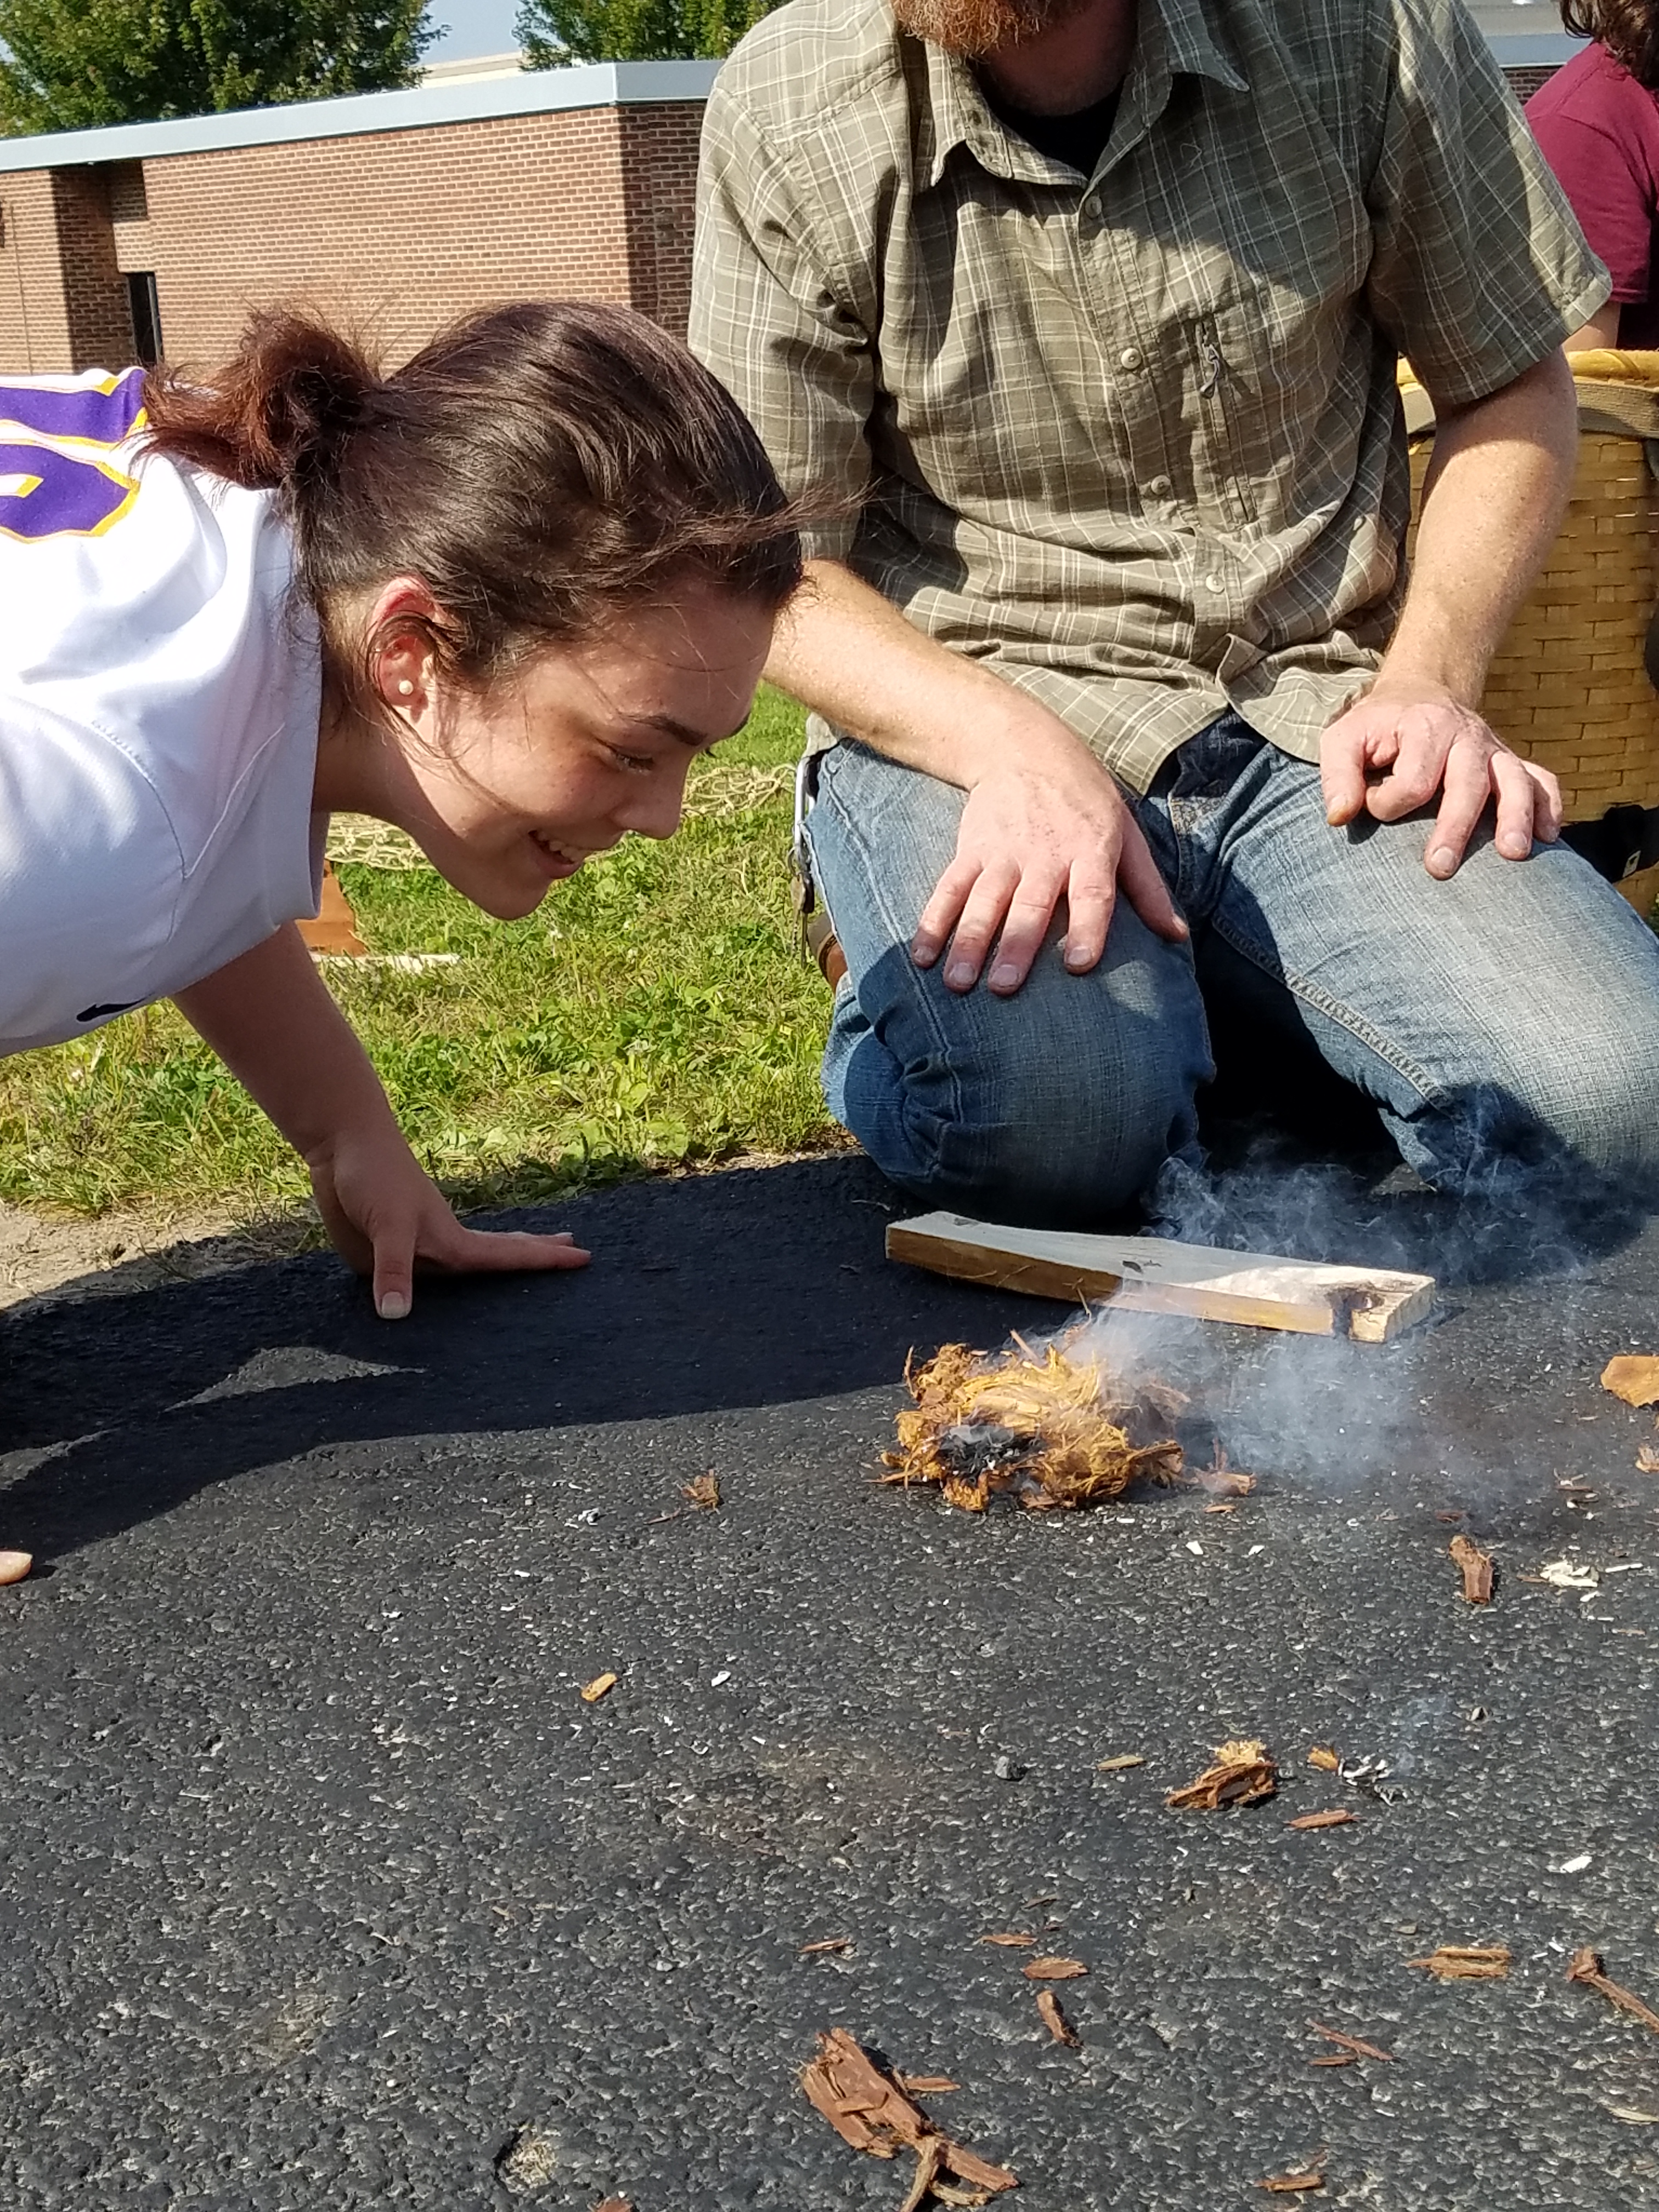 Here the student gently blows on the embers she created to feed the flame.